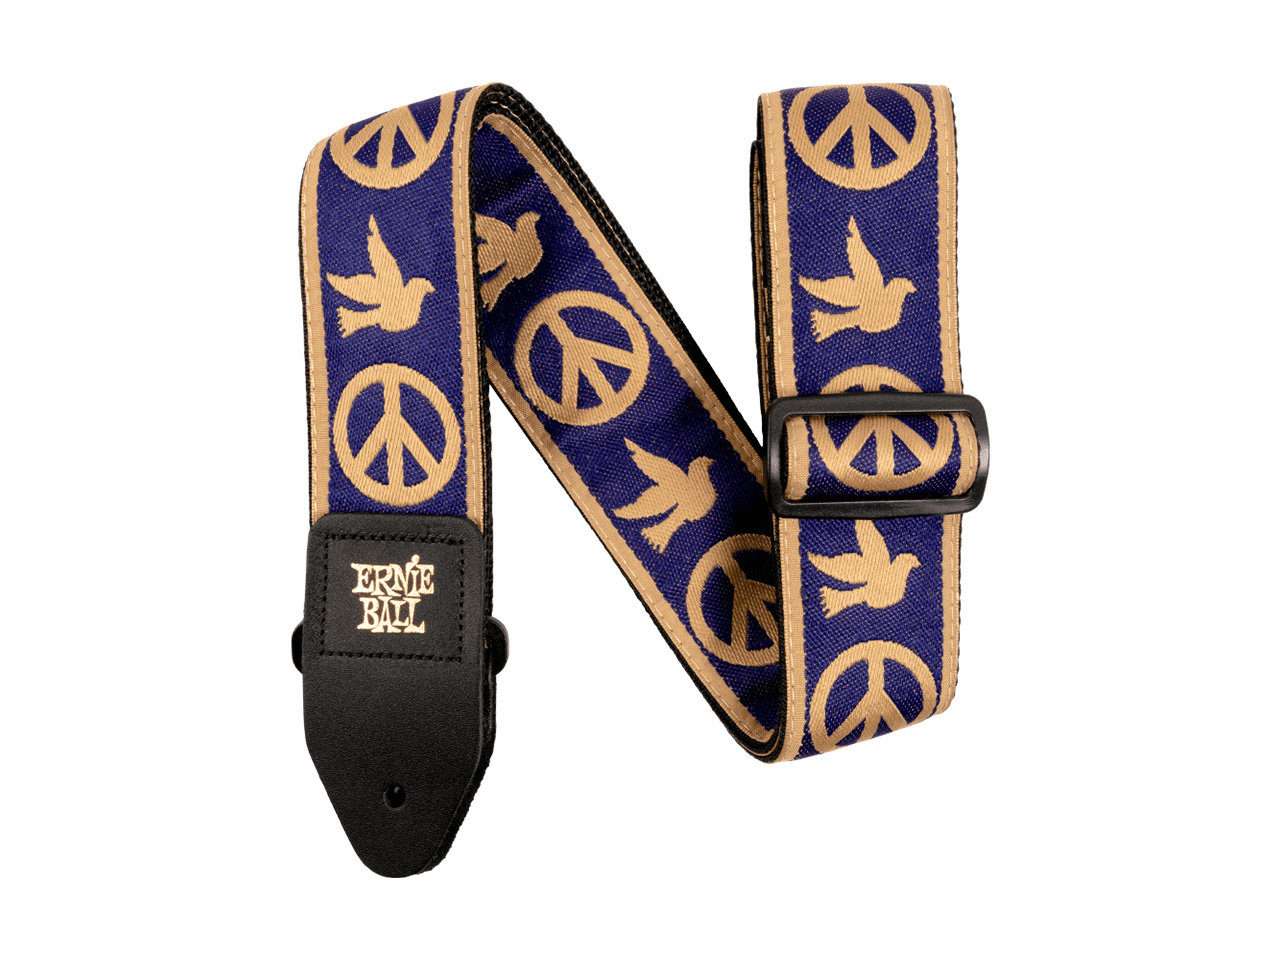 ERNIE BALL(アーニーボール) NAVY BLUE AND BEIGE PEACE LOVE DOVE JACQUARD STRAP(ストラップ)